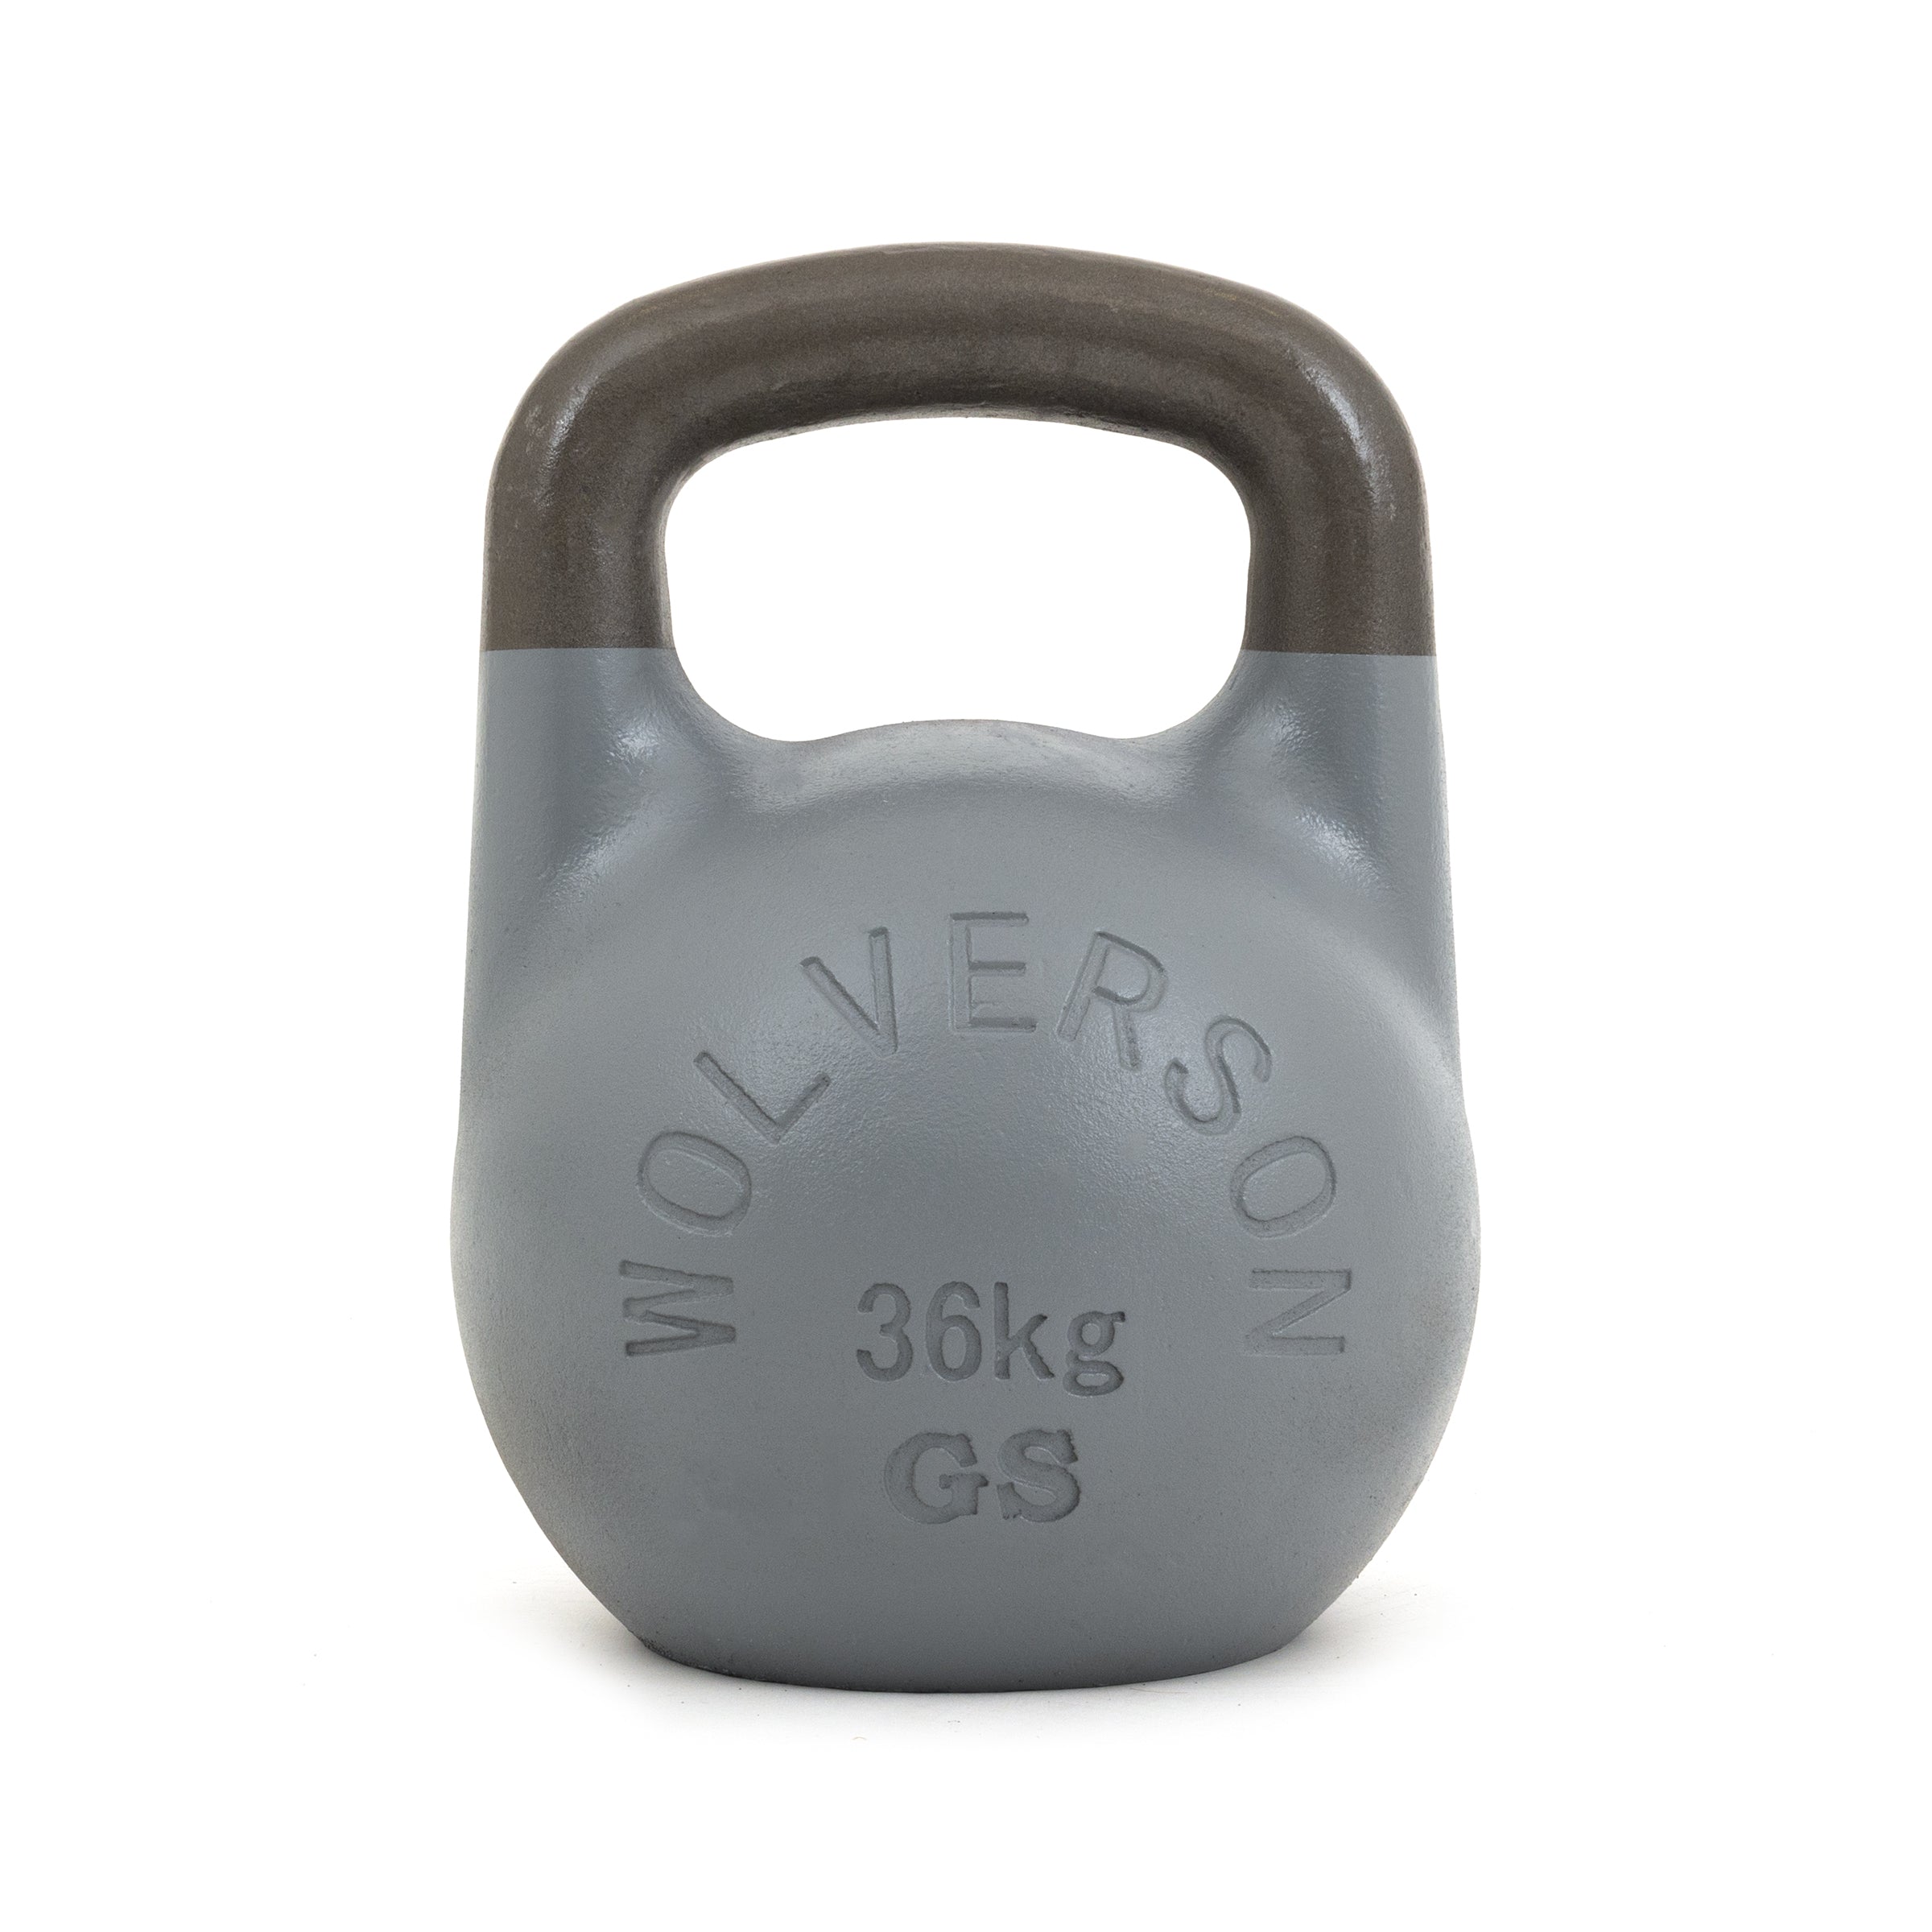 Wolverson GS Competition Kettlebells